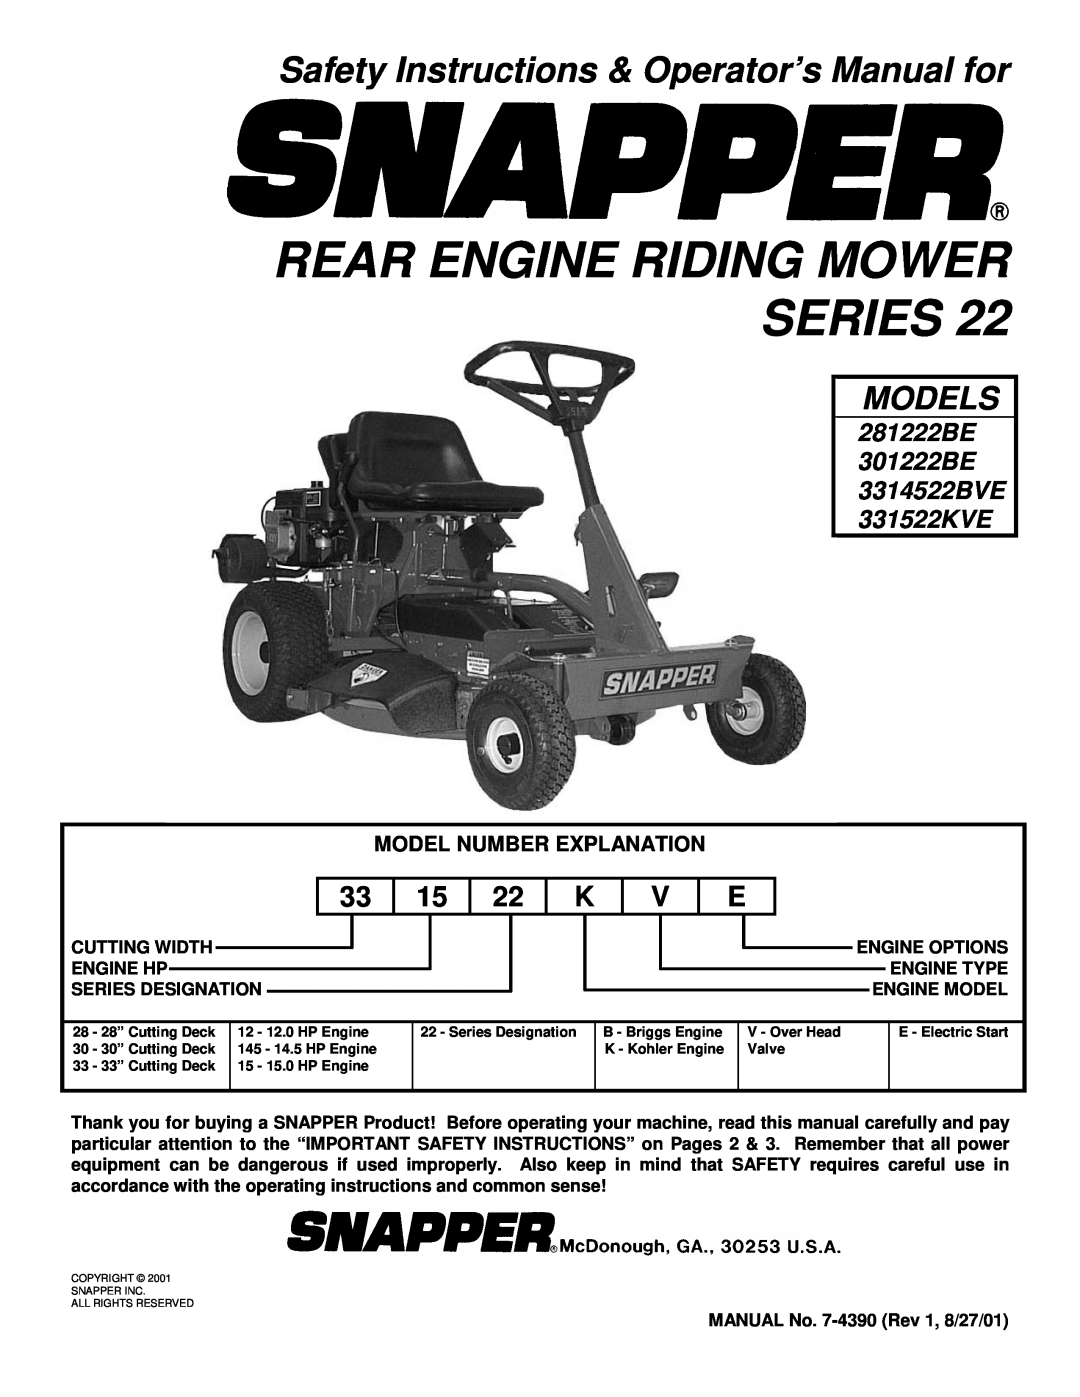 Snapper 3314522BVE important safety instructions Rear Engine Riding Mower Series, Models, Model Number Explanation 